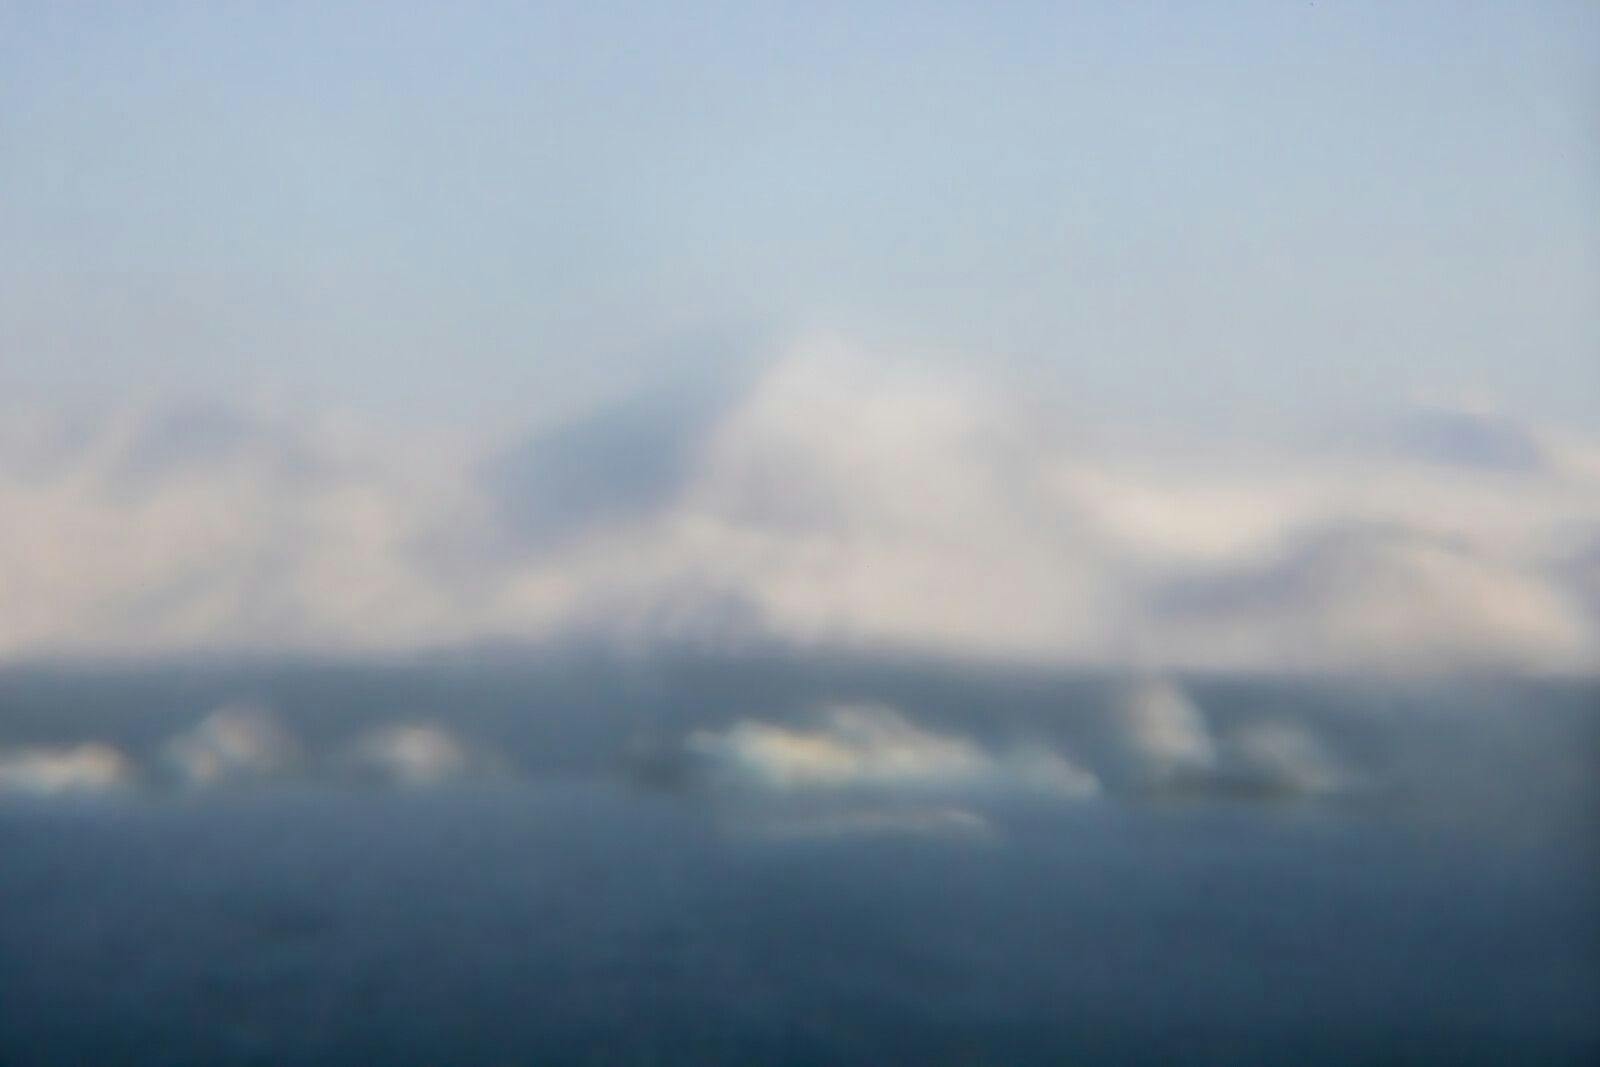 Tristan Duke, Icebergs Adrift, 2022, Digital photograph made using a lens made from glacier ice. Archival pigment inkjet print on cotton rag paper, image courtesy of the artist